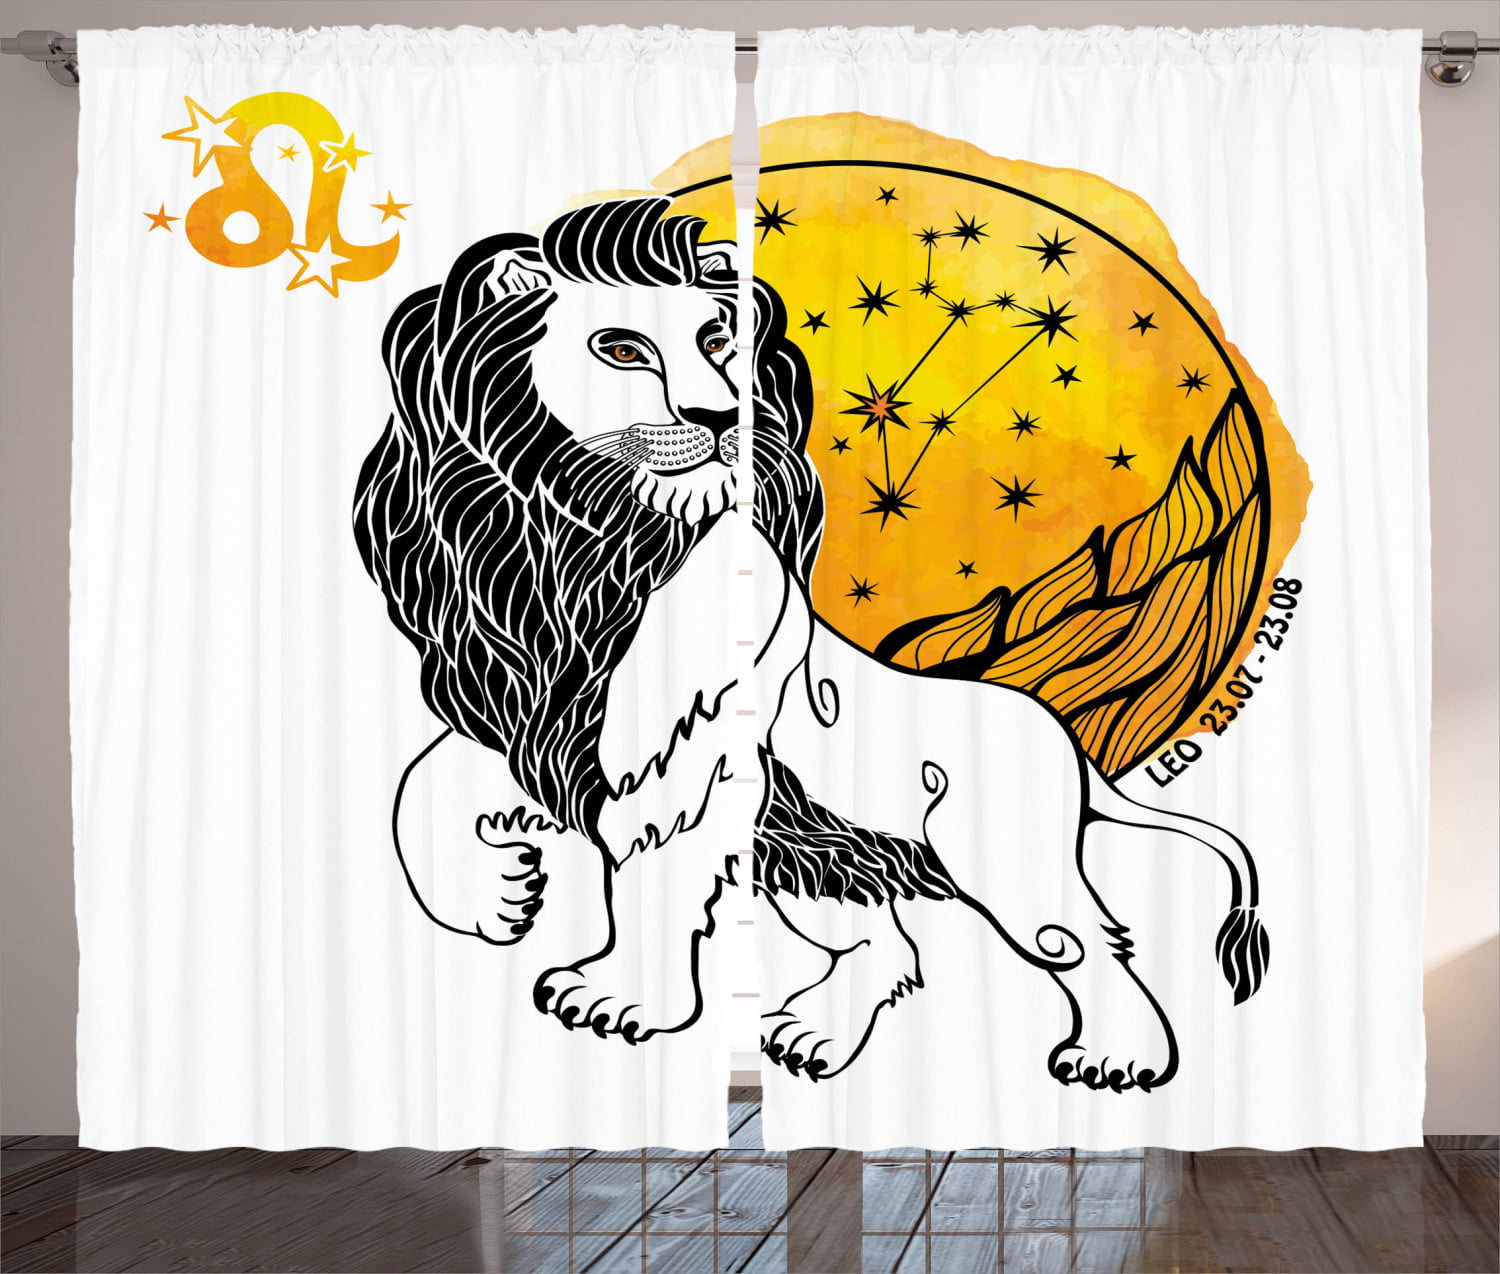 3D Printing Window Curtains African Beauty Girl & Lion Blockout Drapes Fabric 